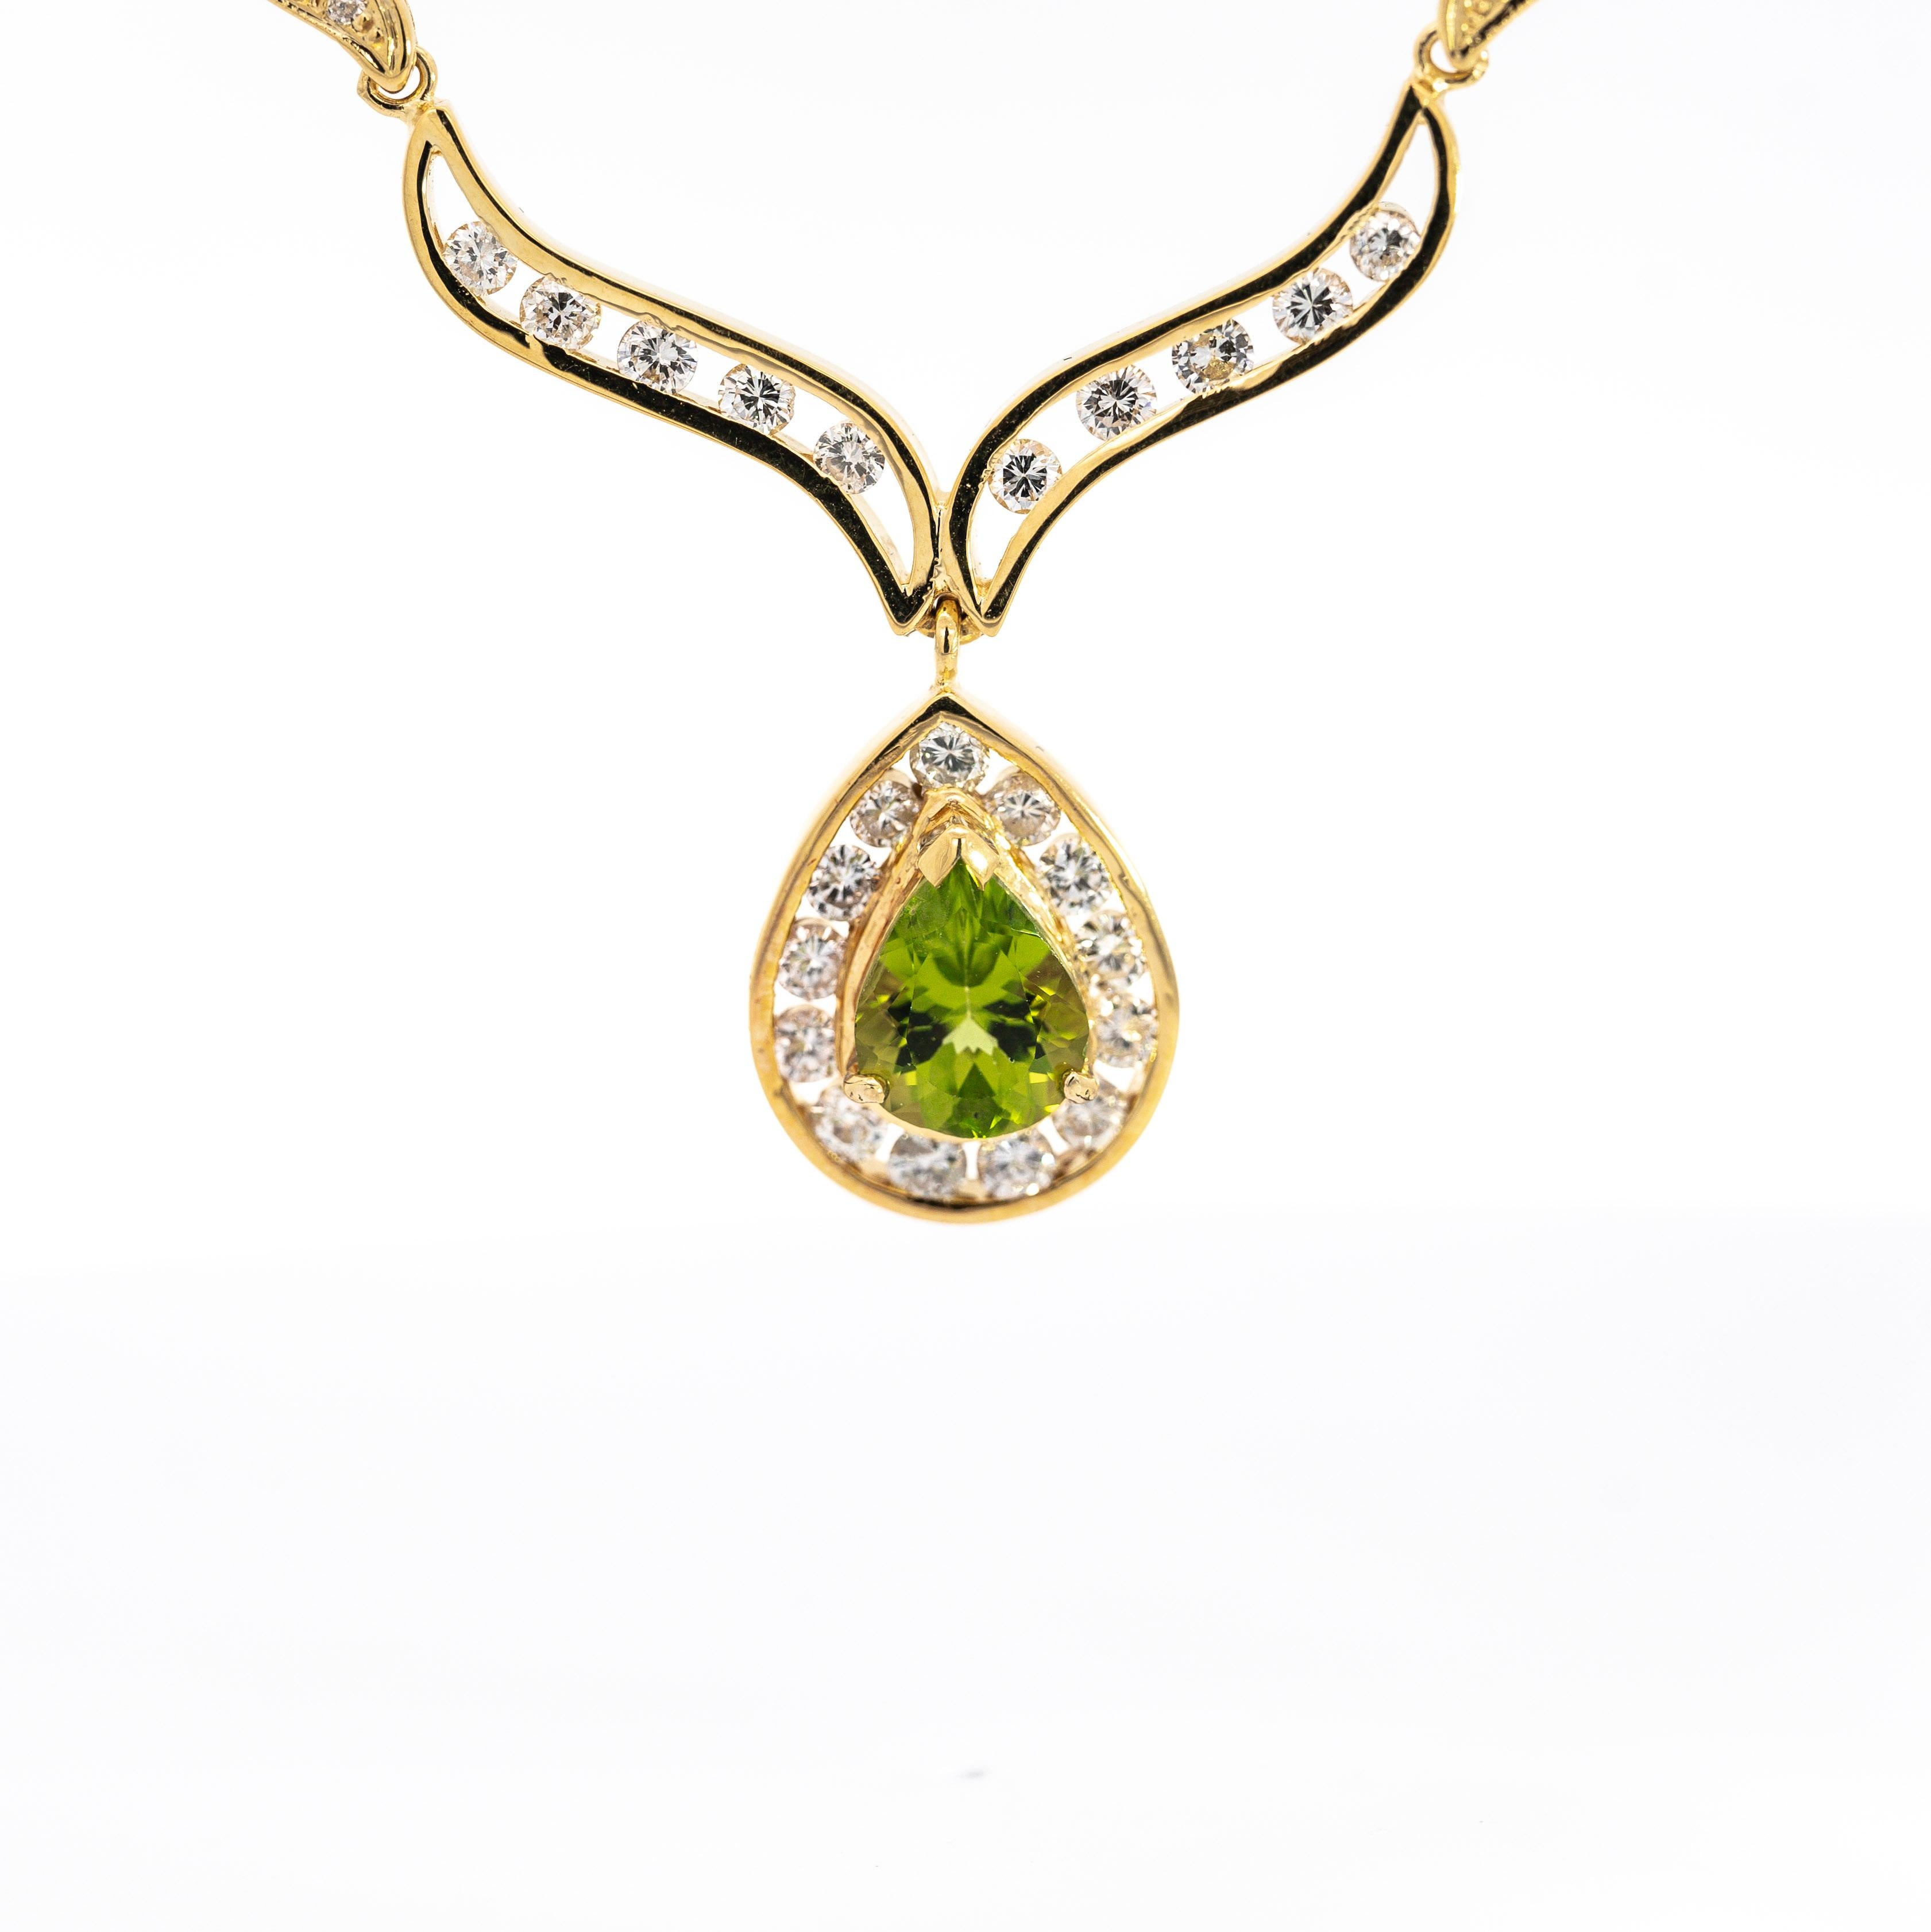 Vintage Pear Cut Green Peridot Drop Pendant Necklace with Diamonds in 18K Gold For Sale 1